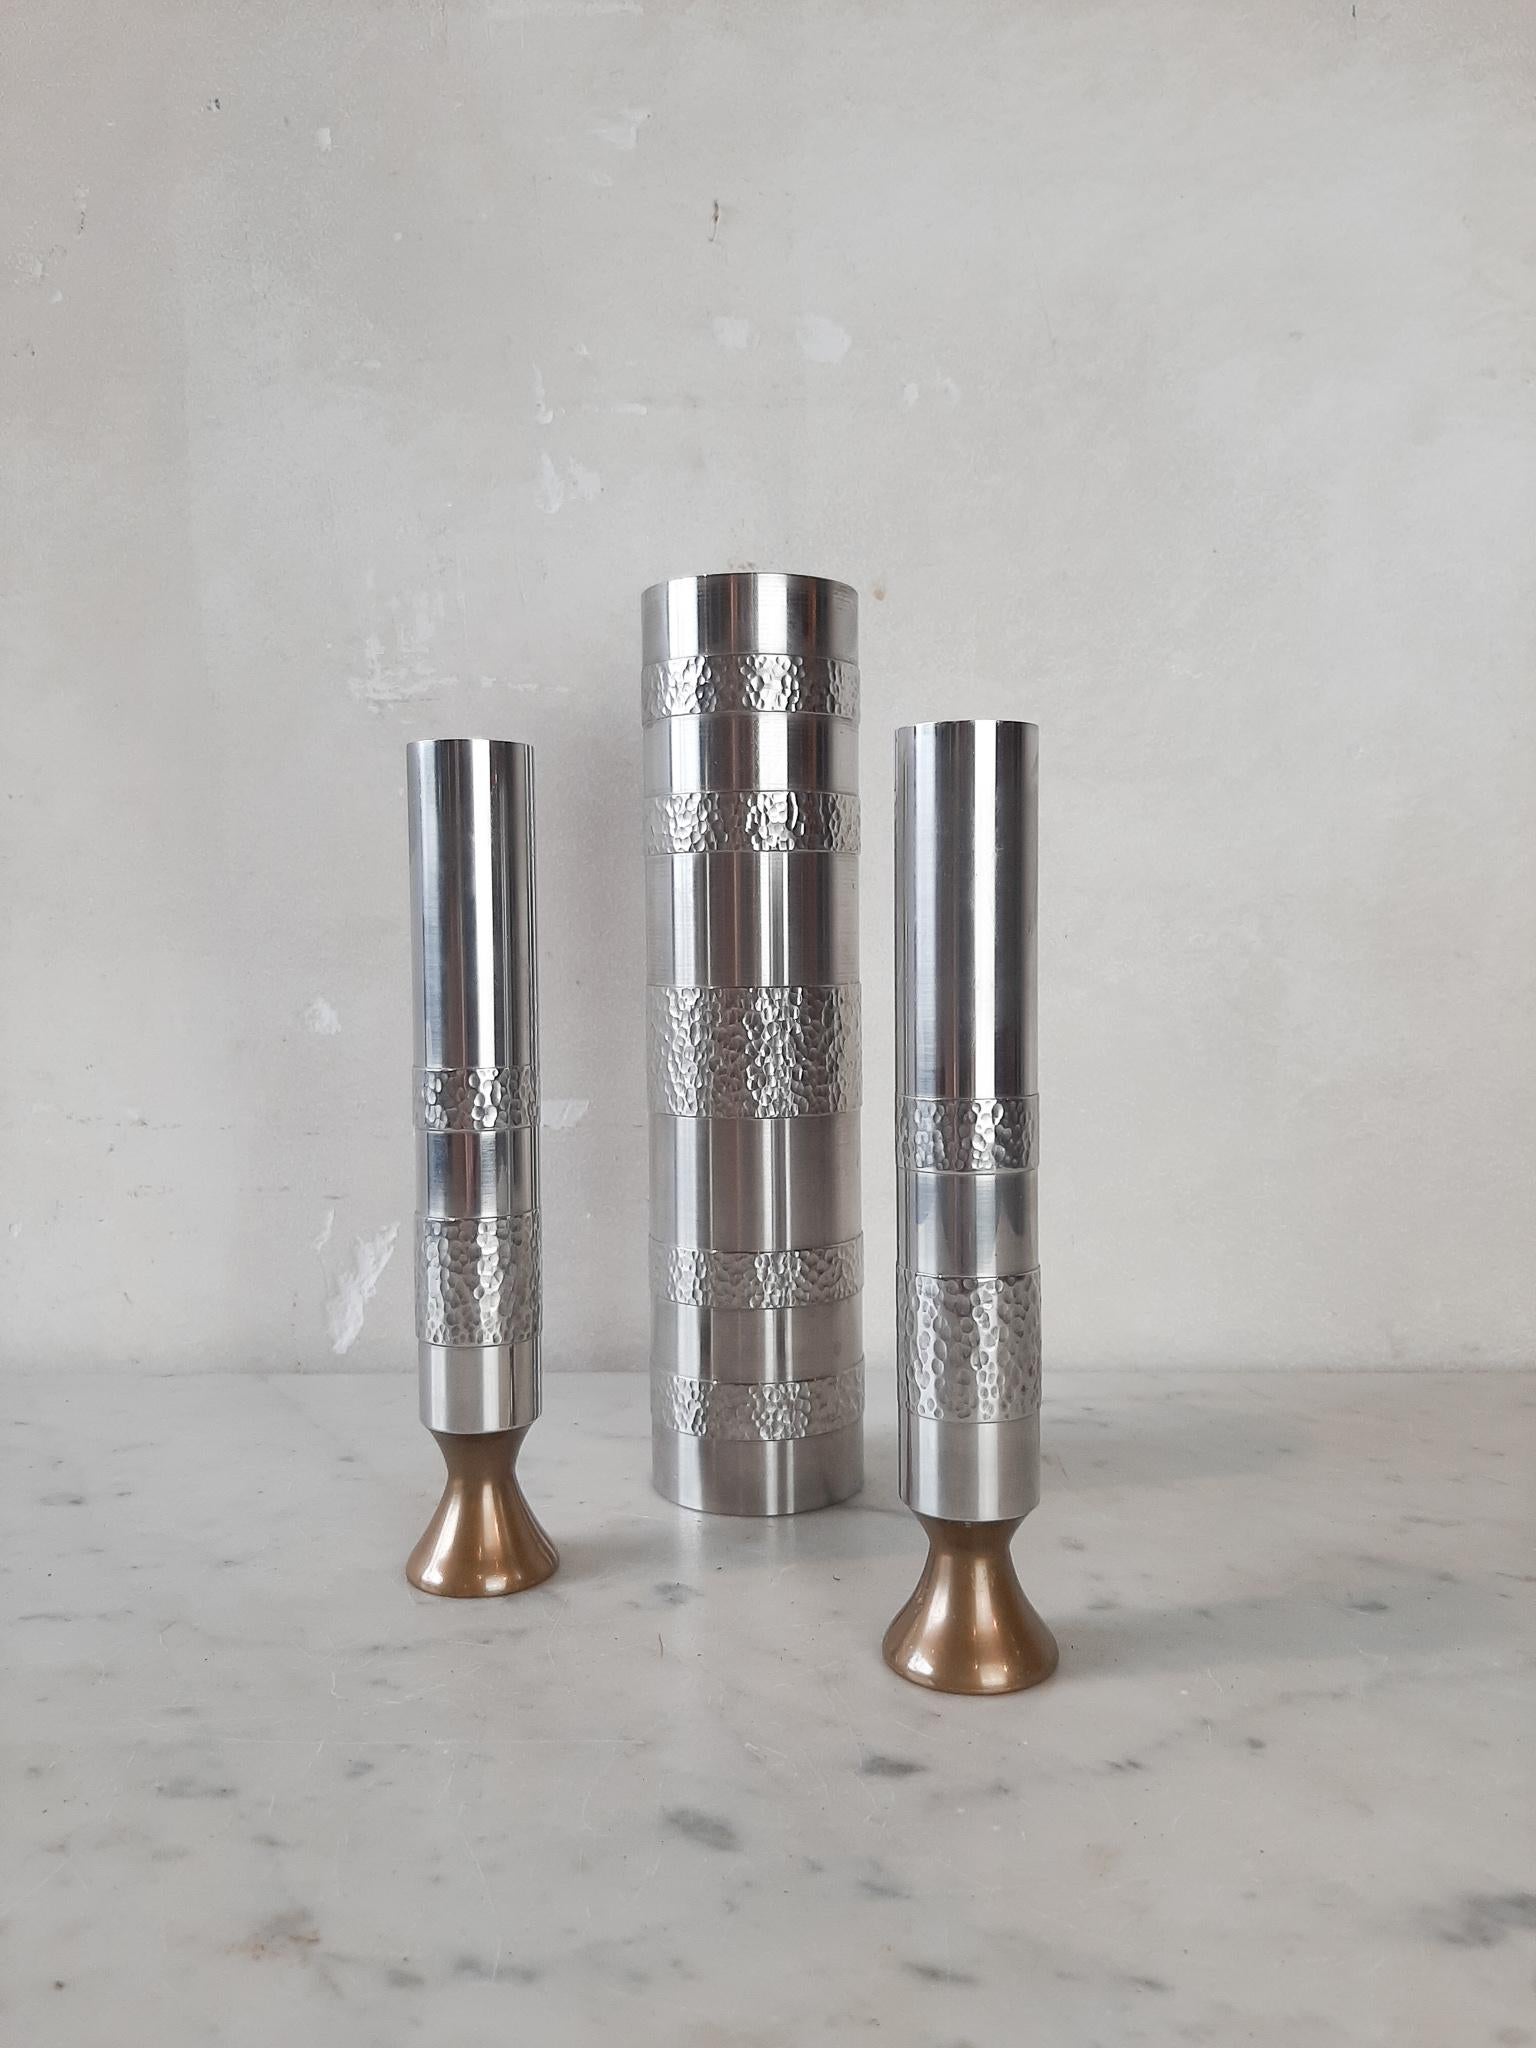 Set of three handmade metal Brutalist vases, produced in Germany 1970s. Made of very heavy stainless steel with the minimalistic 1970s design and the Brutalist decorative pattern made by the handcrafted sculptural surface structure of the steel.